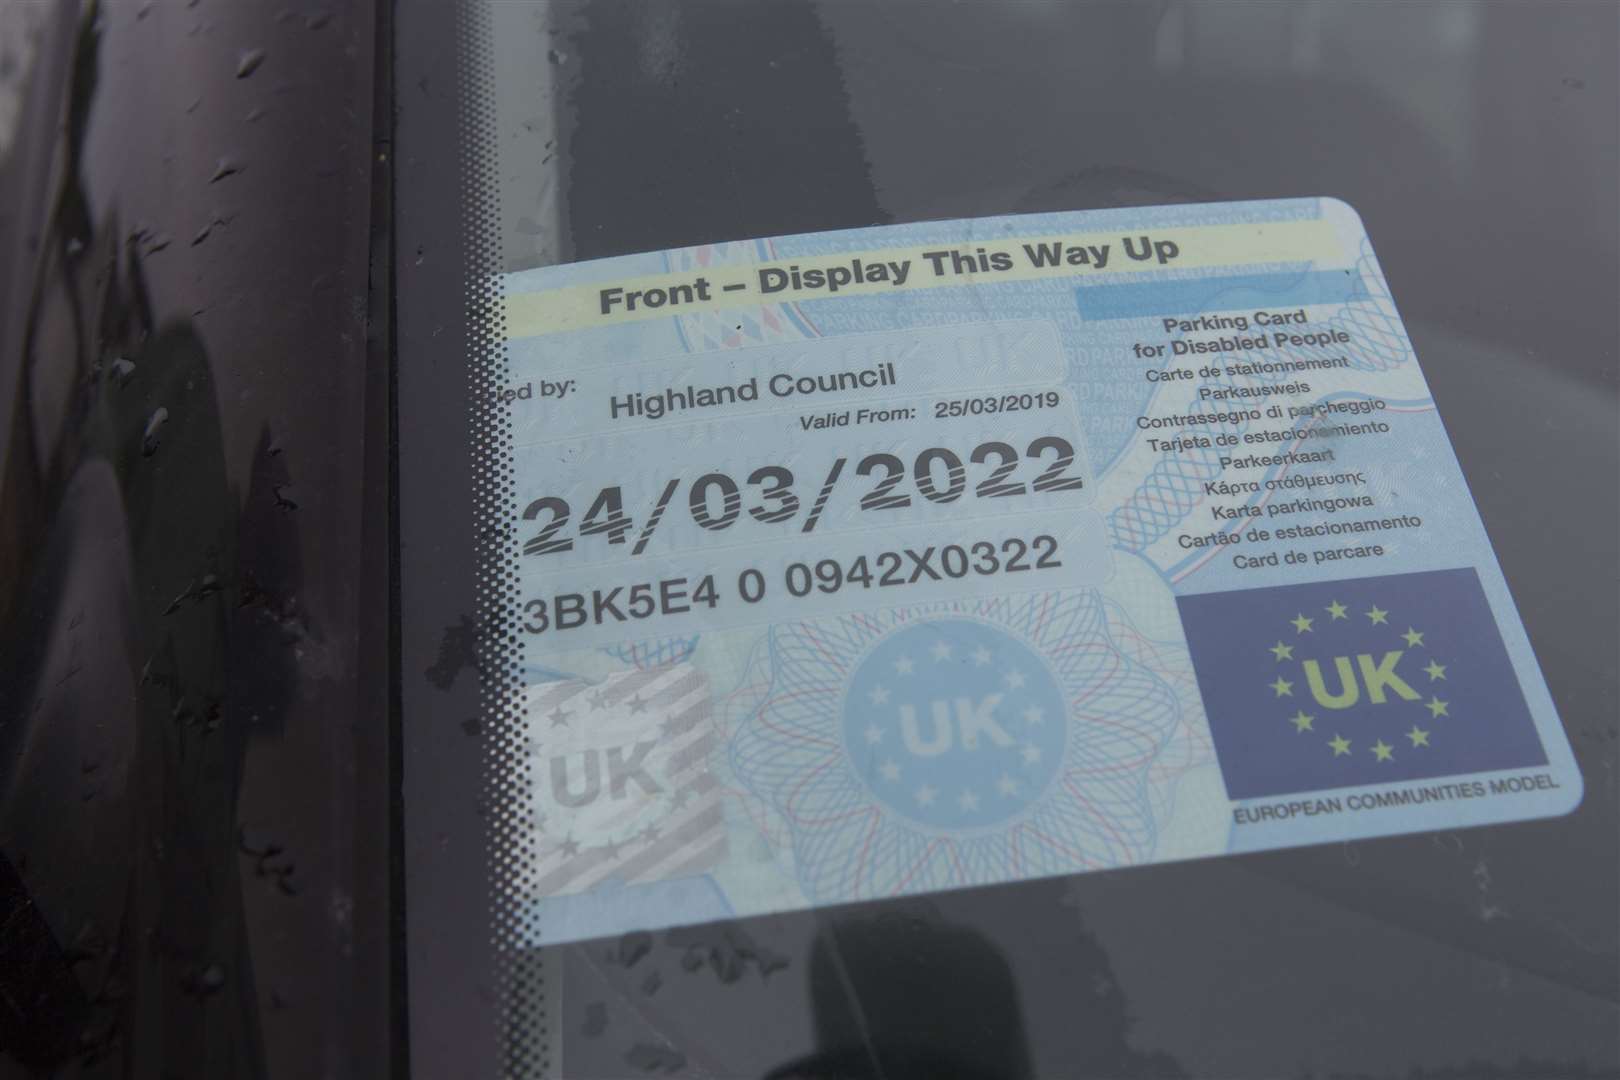 The expired disablity parking card that earned Halkirk man John O'Donnell, Marrbank, Camilla St, Halkirk, a parking ticket shortly after his wife died. Photo: Robert MacDonald/Northern Studios